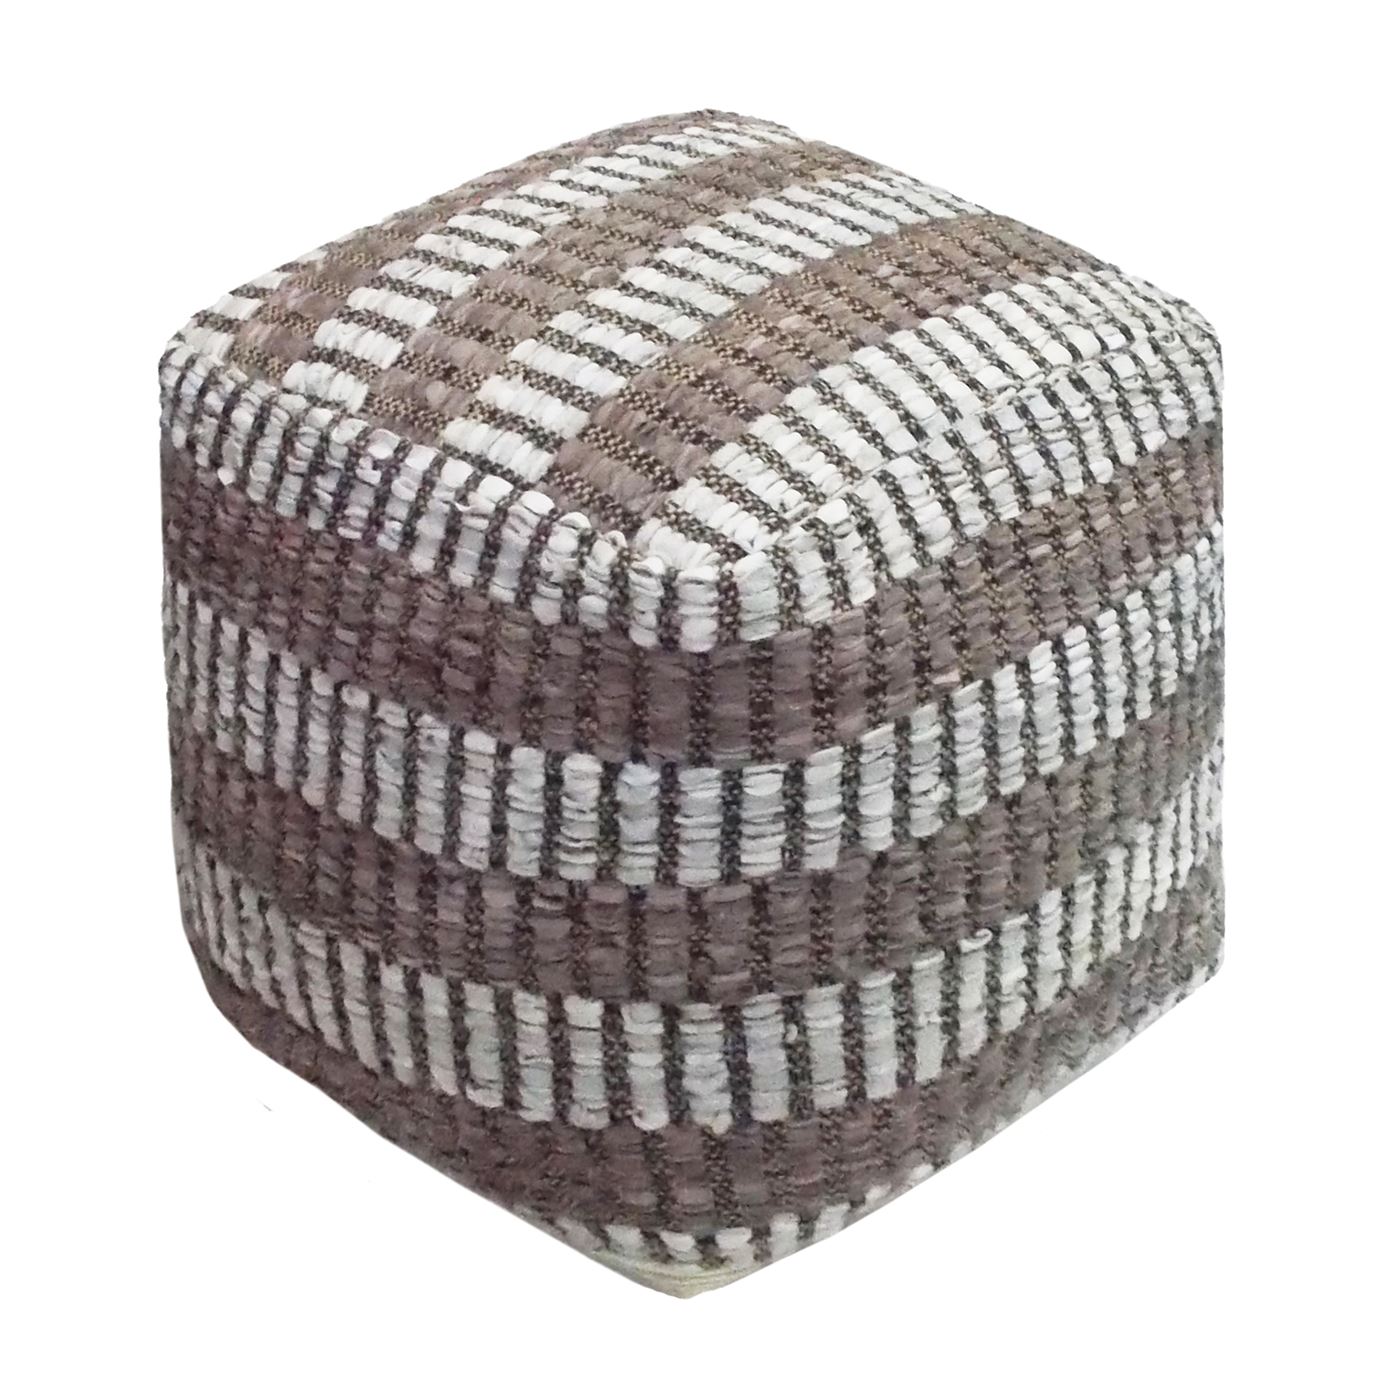 Cranley Pouf, Leather, Hemp, Natural White, Taupe, Pitloom, Flat Weave